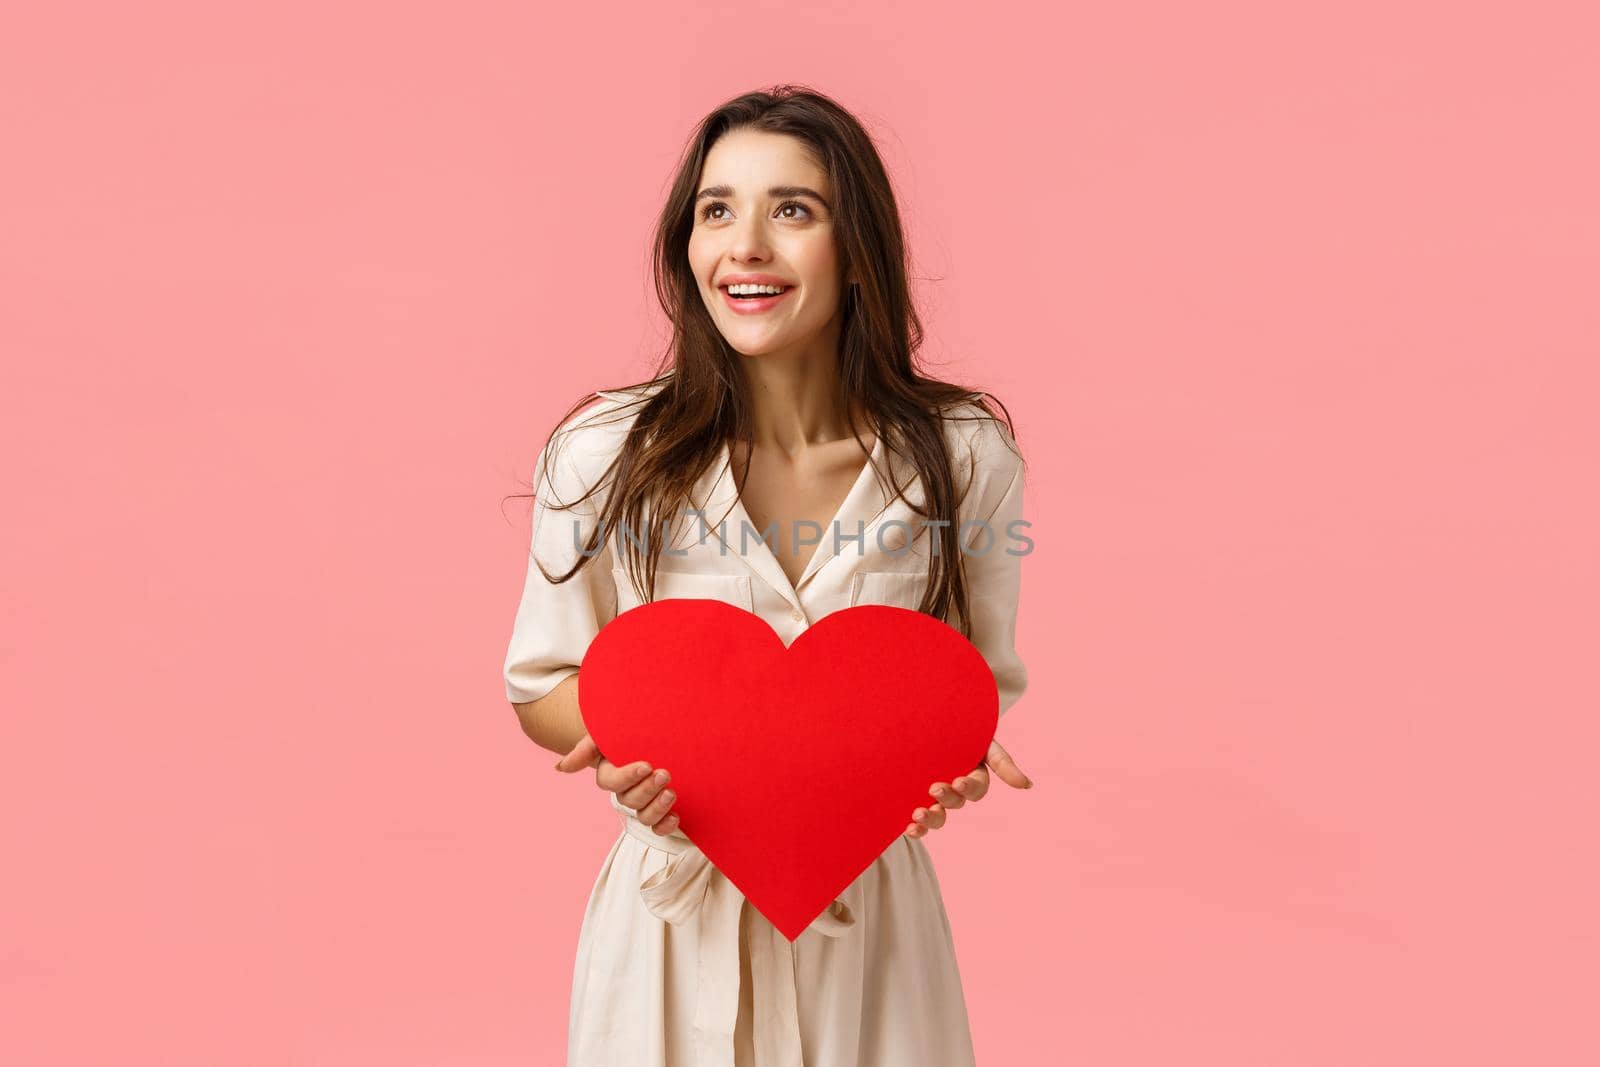 Amused and carefree good-looking european female in dress, holding valentines card, big red heart, looking left amazed and happy, smiling impressed, standing pink background joyful.